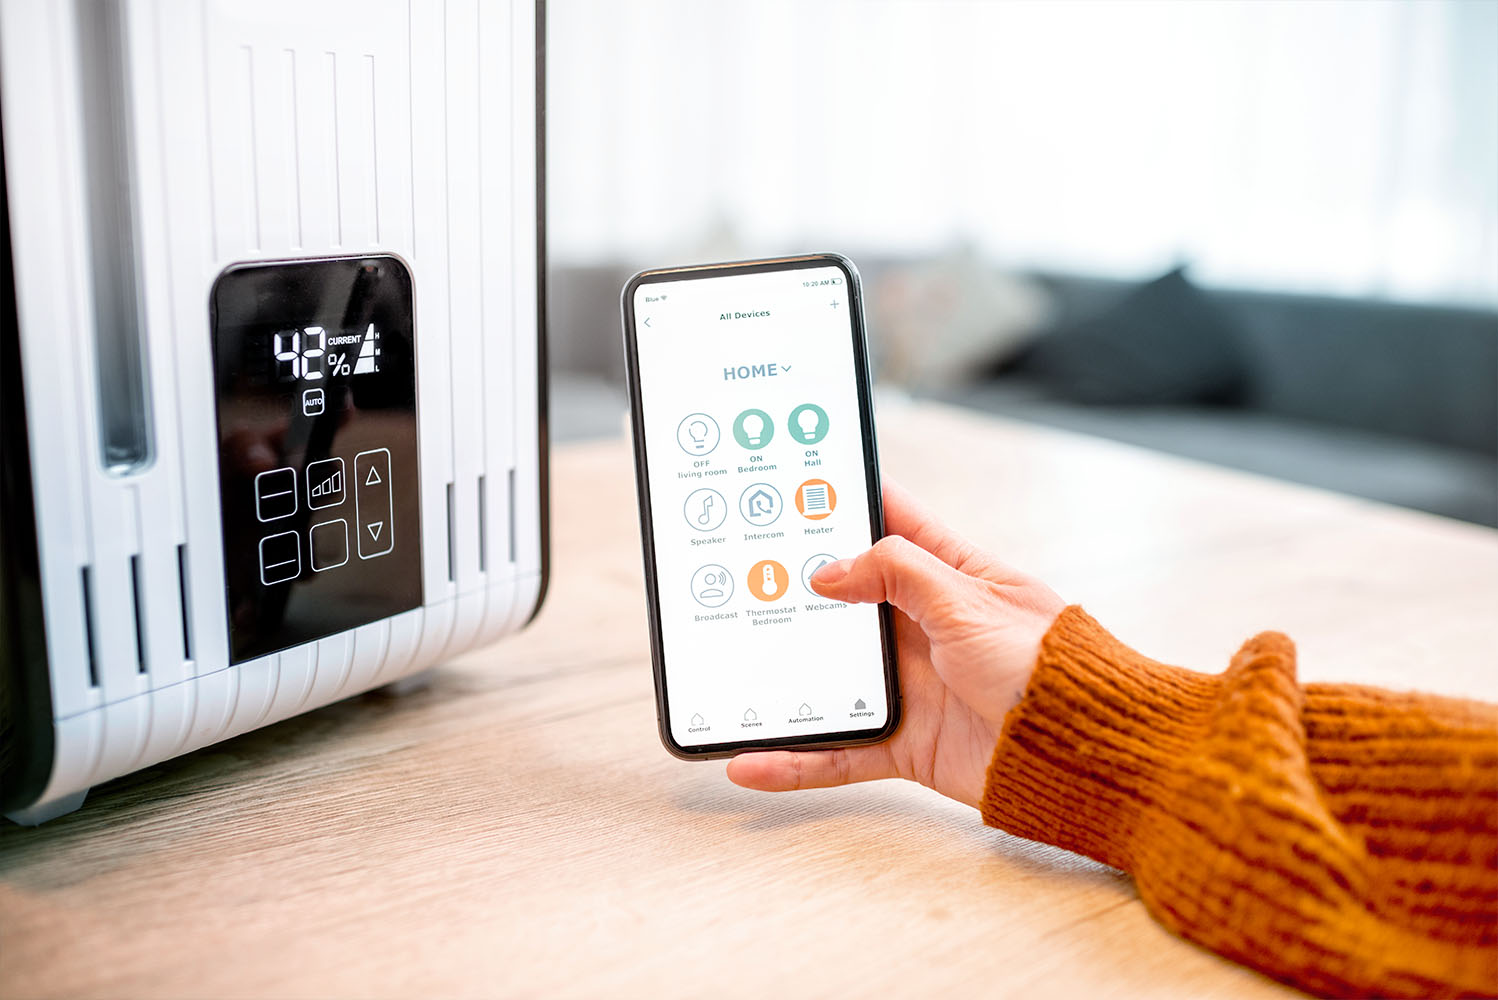 DT_smarthome-thermostat